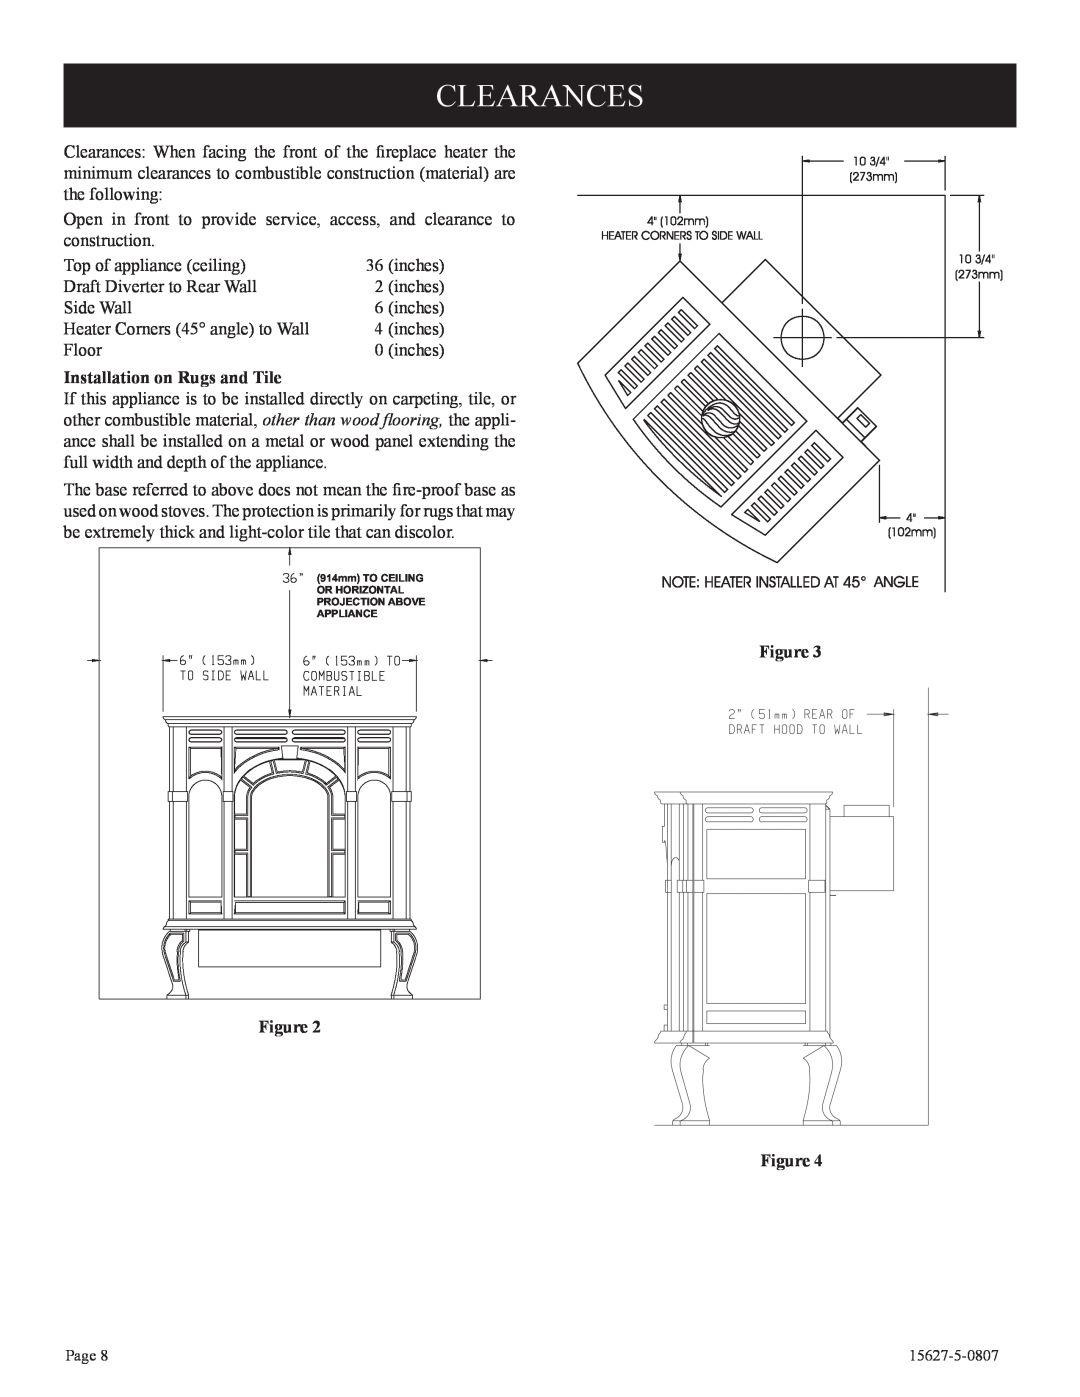 Empire Comfort Systems CIBV-30-20 installation instructions Clearances, Installation on Rugs and Tile 